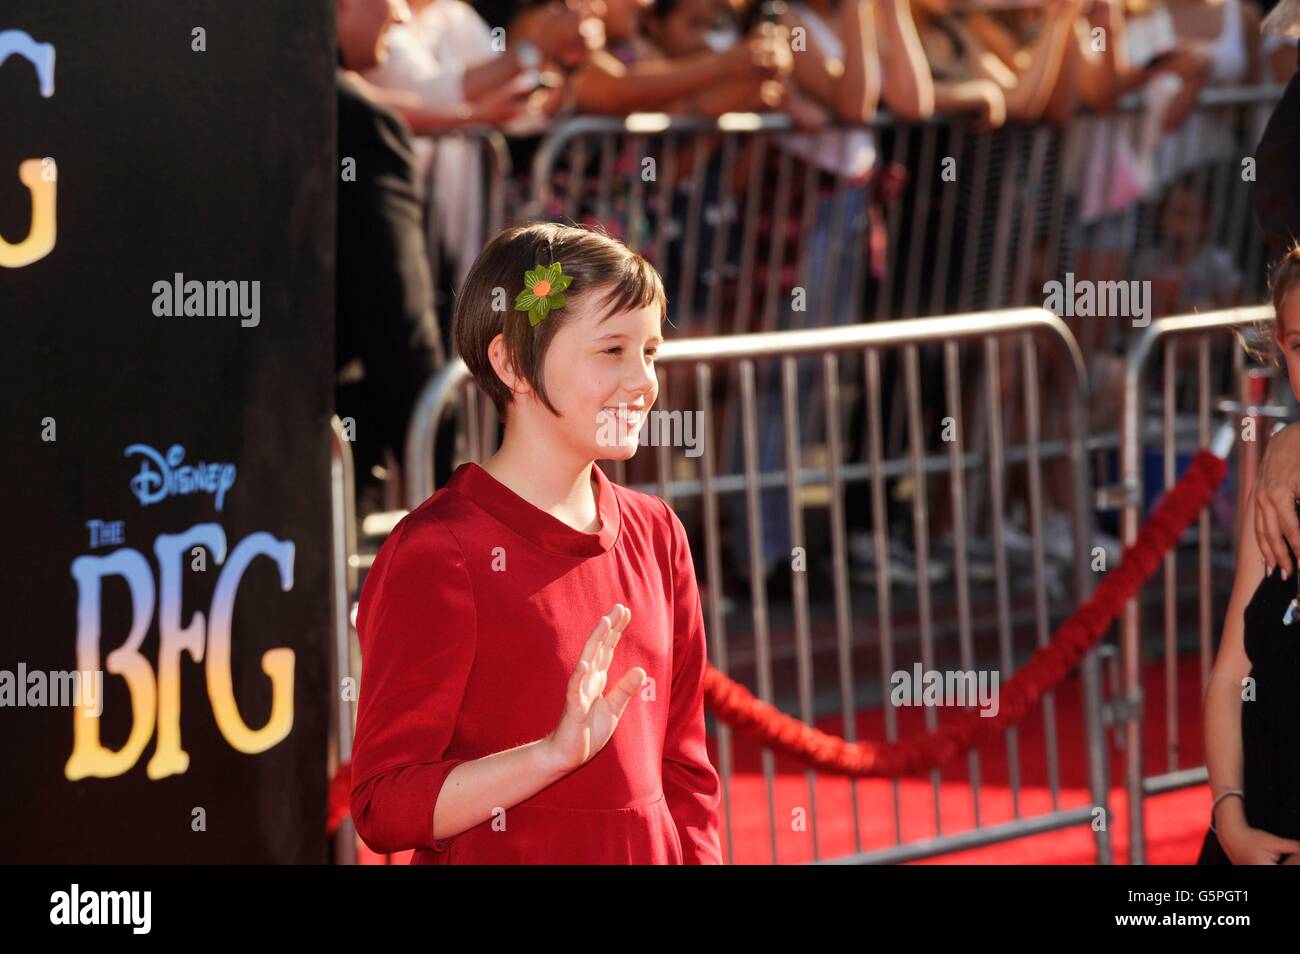 Los Angeles, CA, USA. 21st June, 2016. Ruby Barnhill at arrivals for THE BFG (Big Friendly Giant) Premiere, El Capitan Theatre, Los Angeles, CA June 21, 2016. © Jared Milgrim/Everett Collection/Alamy Live News Stock Photo